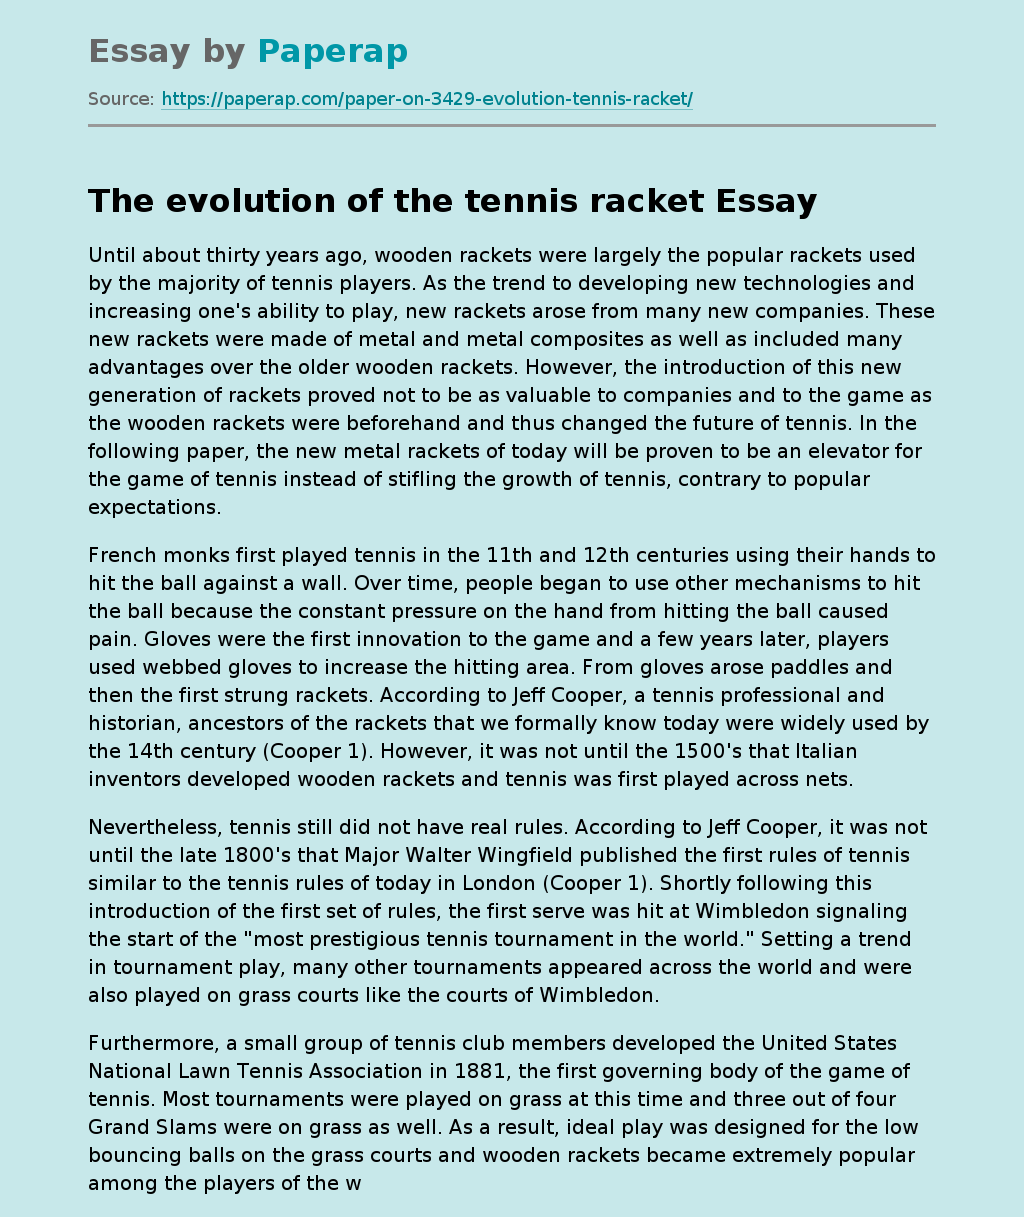 The evolution of the tennis racket